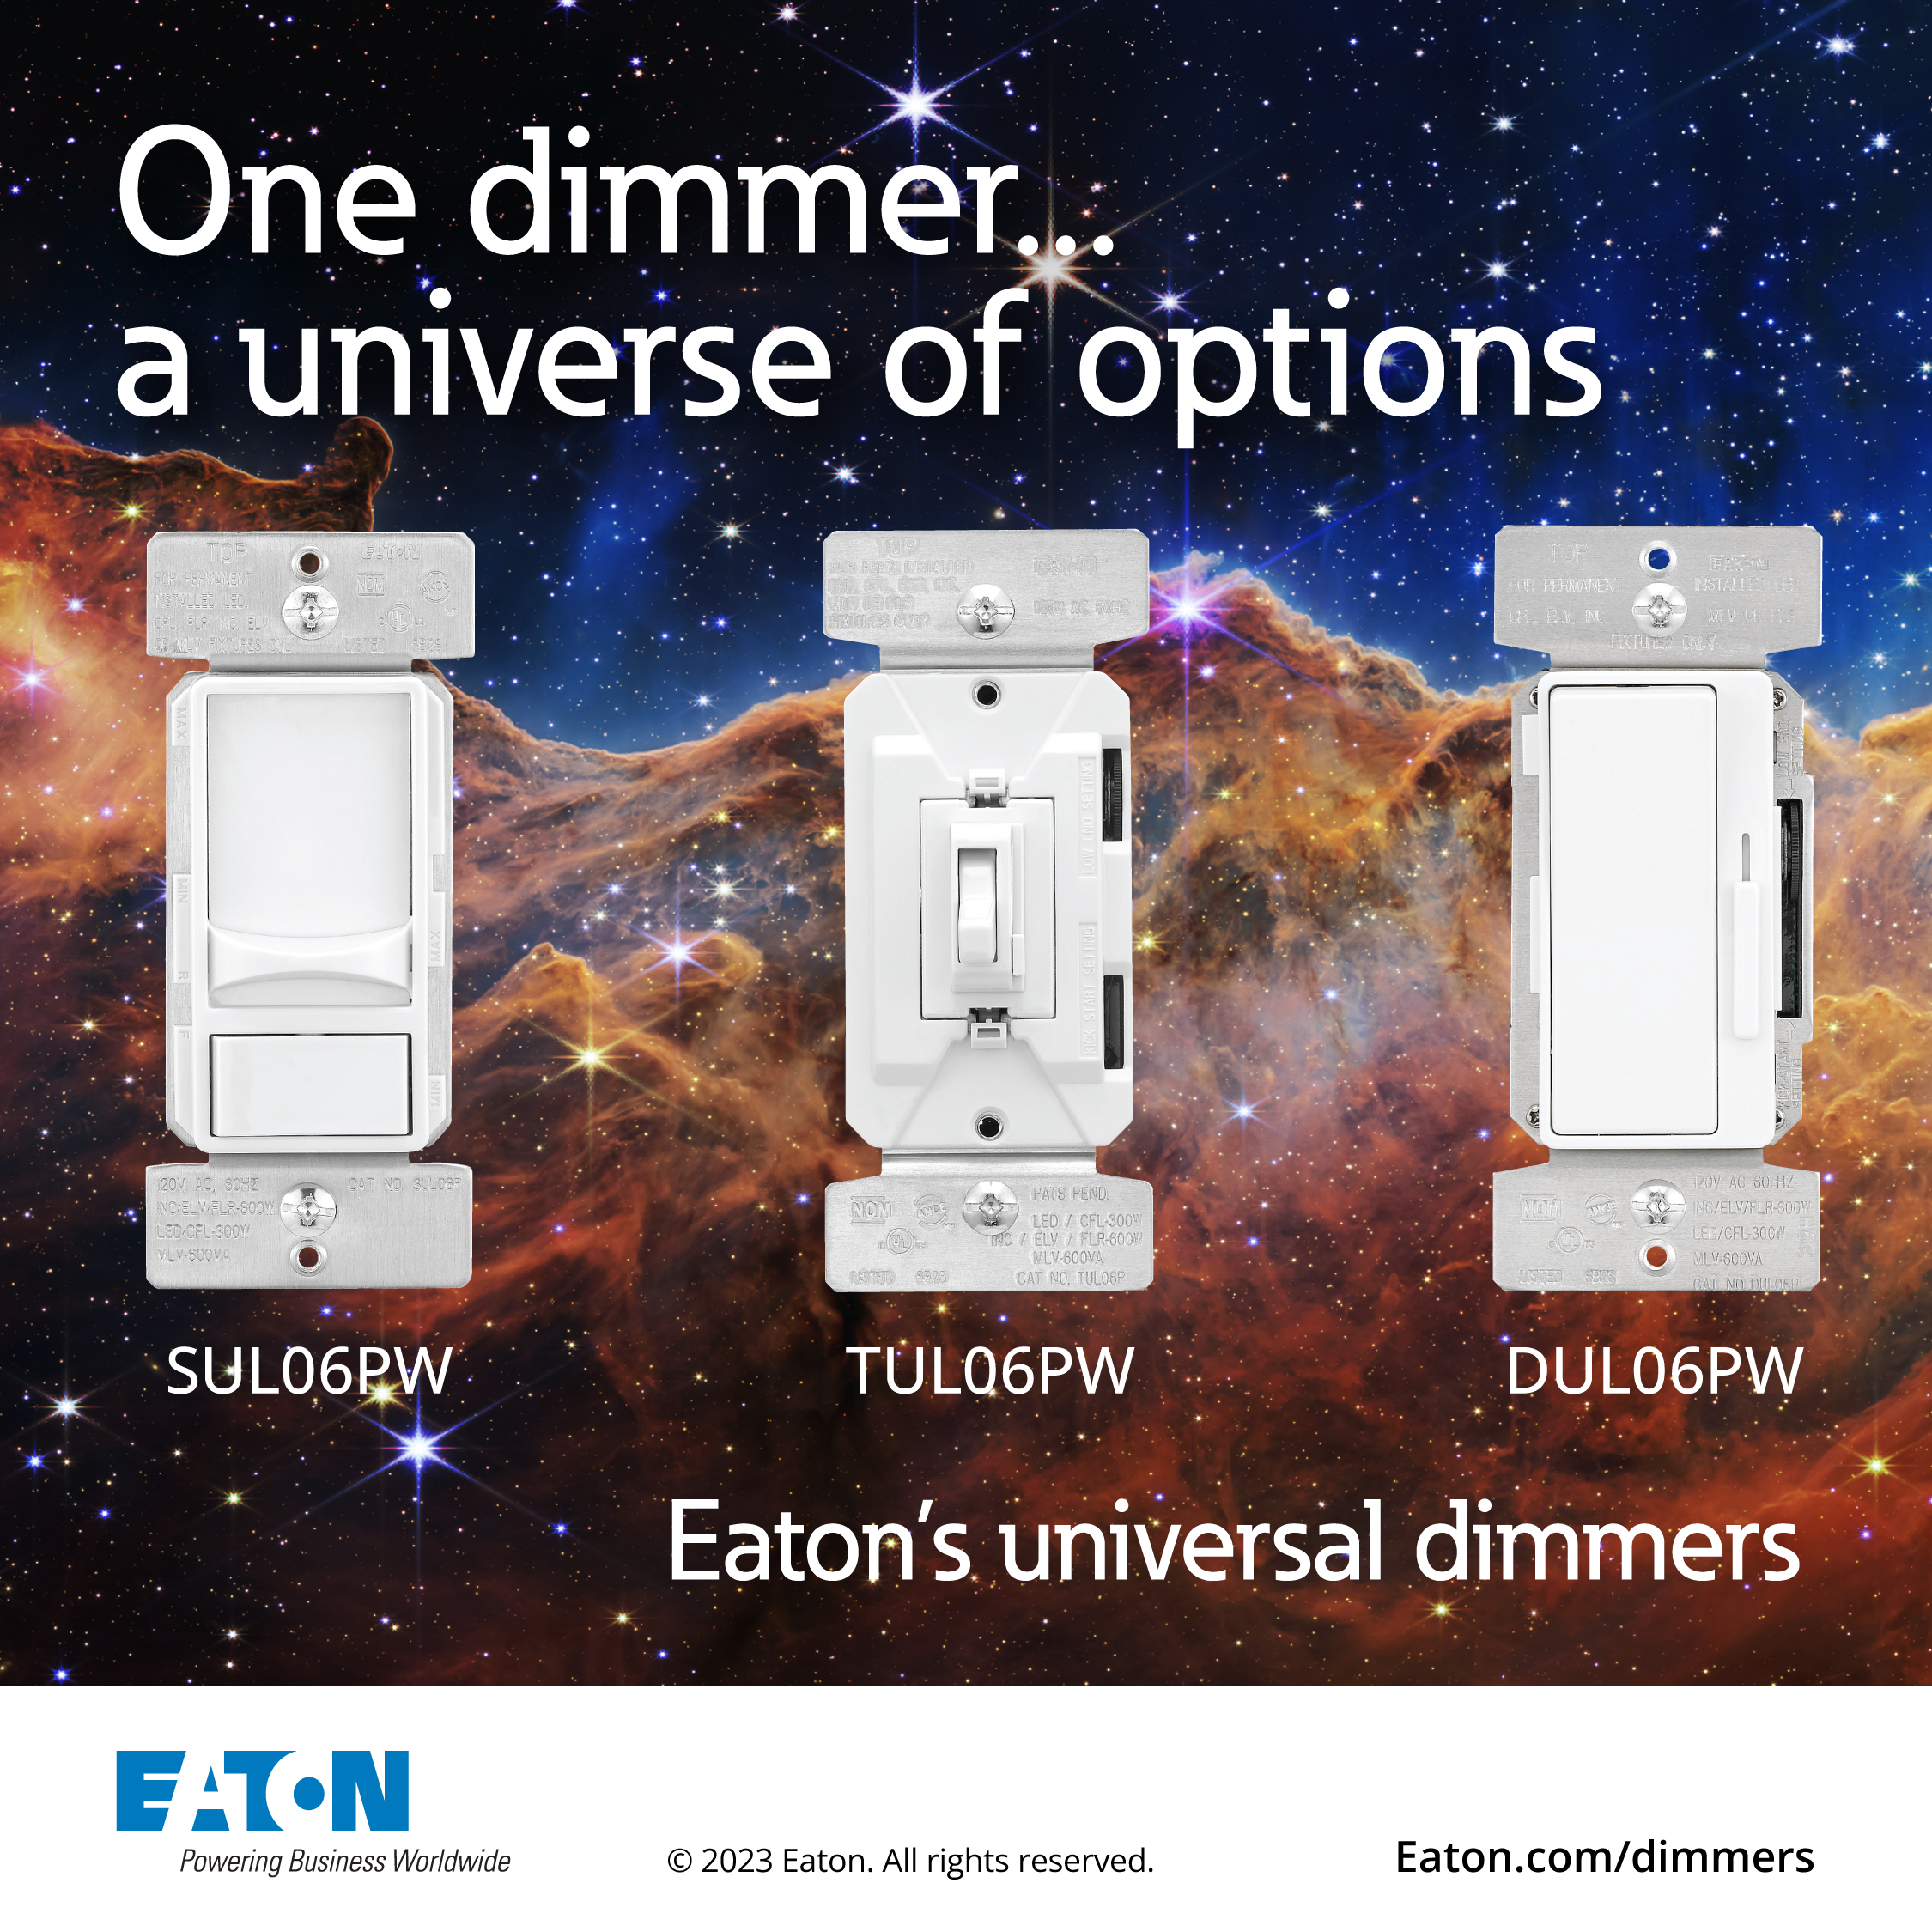 Eaton Universal Dimmers